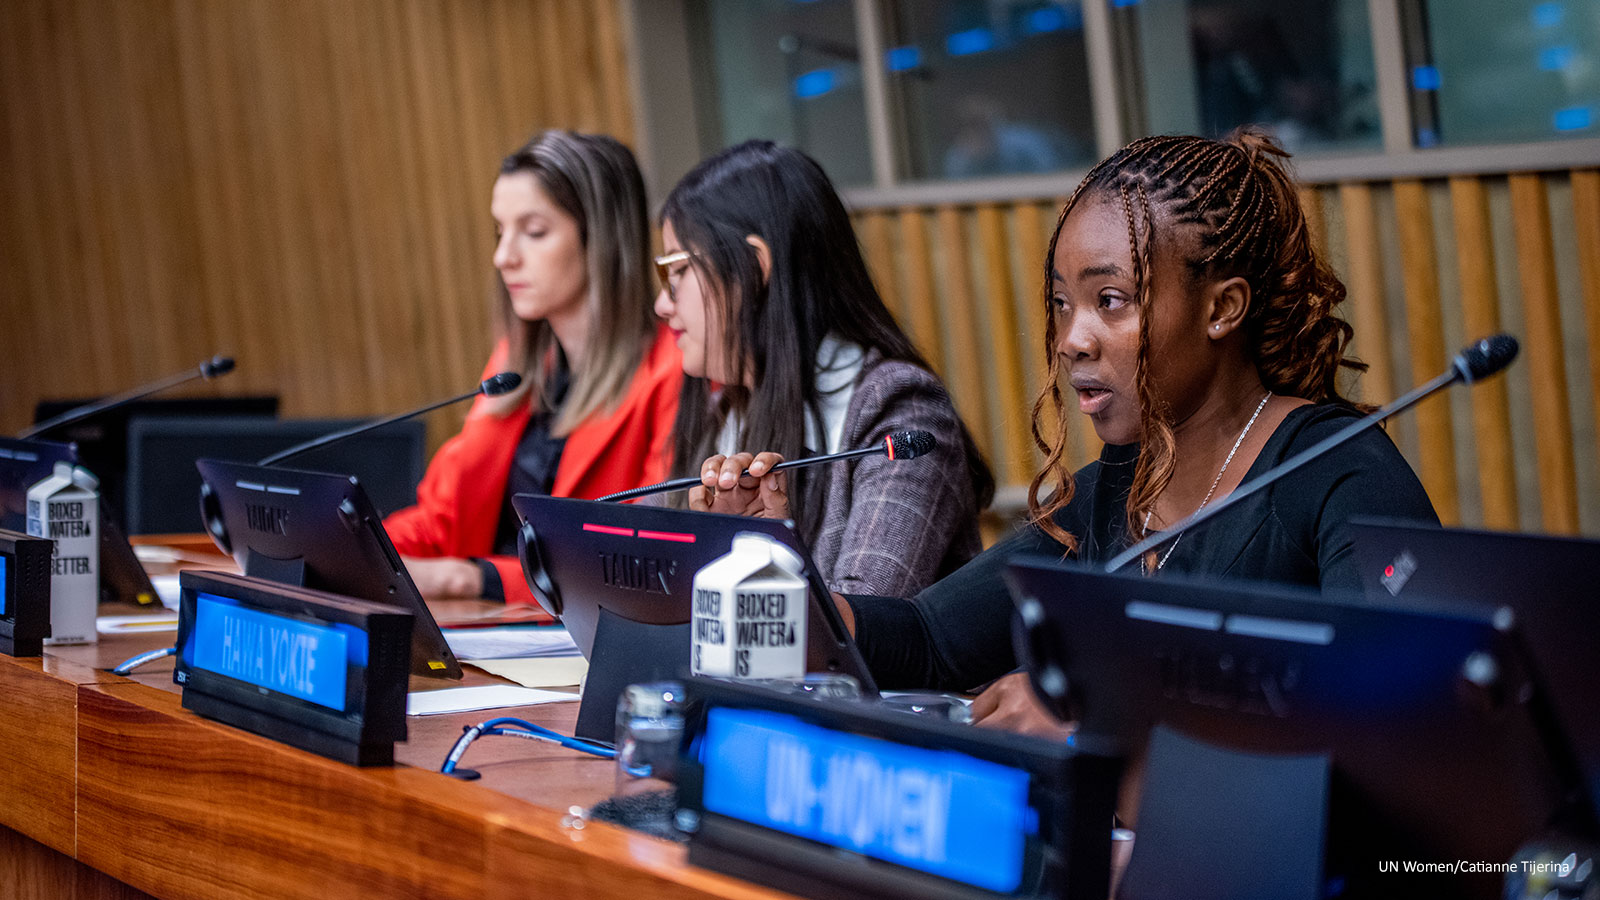 Hawa Yoki advocated for collective effort on the part of governments, private sector organizations, civil society groups and individuals to address the challenges faced by women and girls in technology. Photo: UN Women/Catianne Tijerina